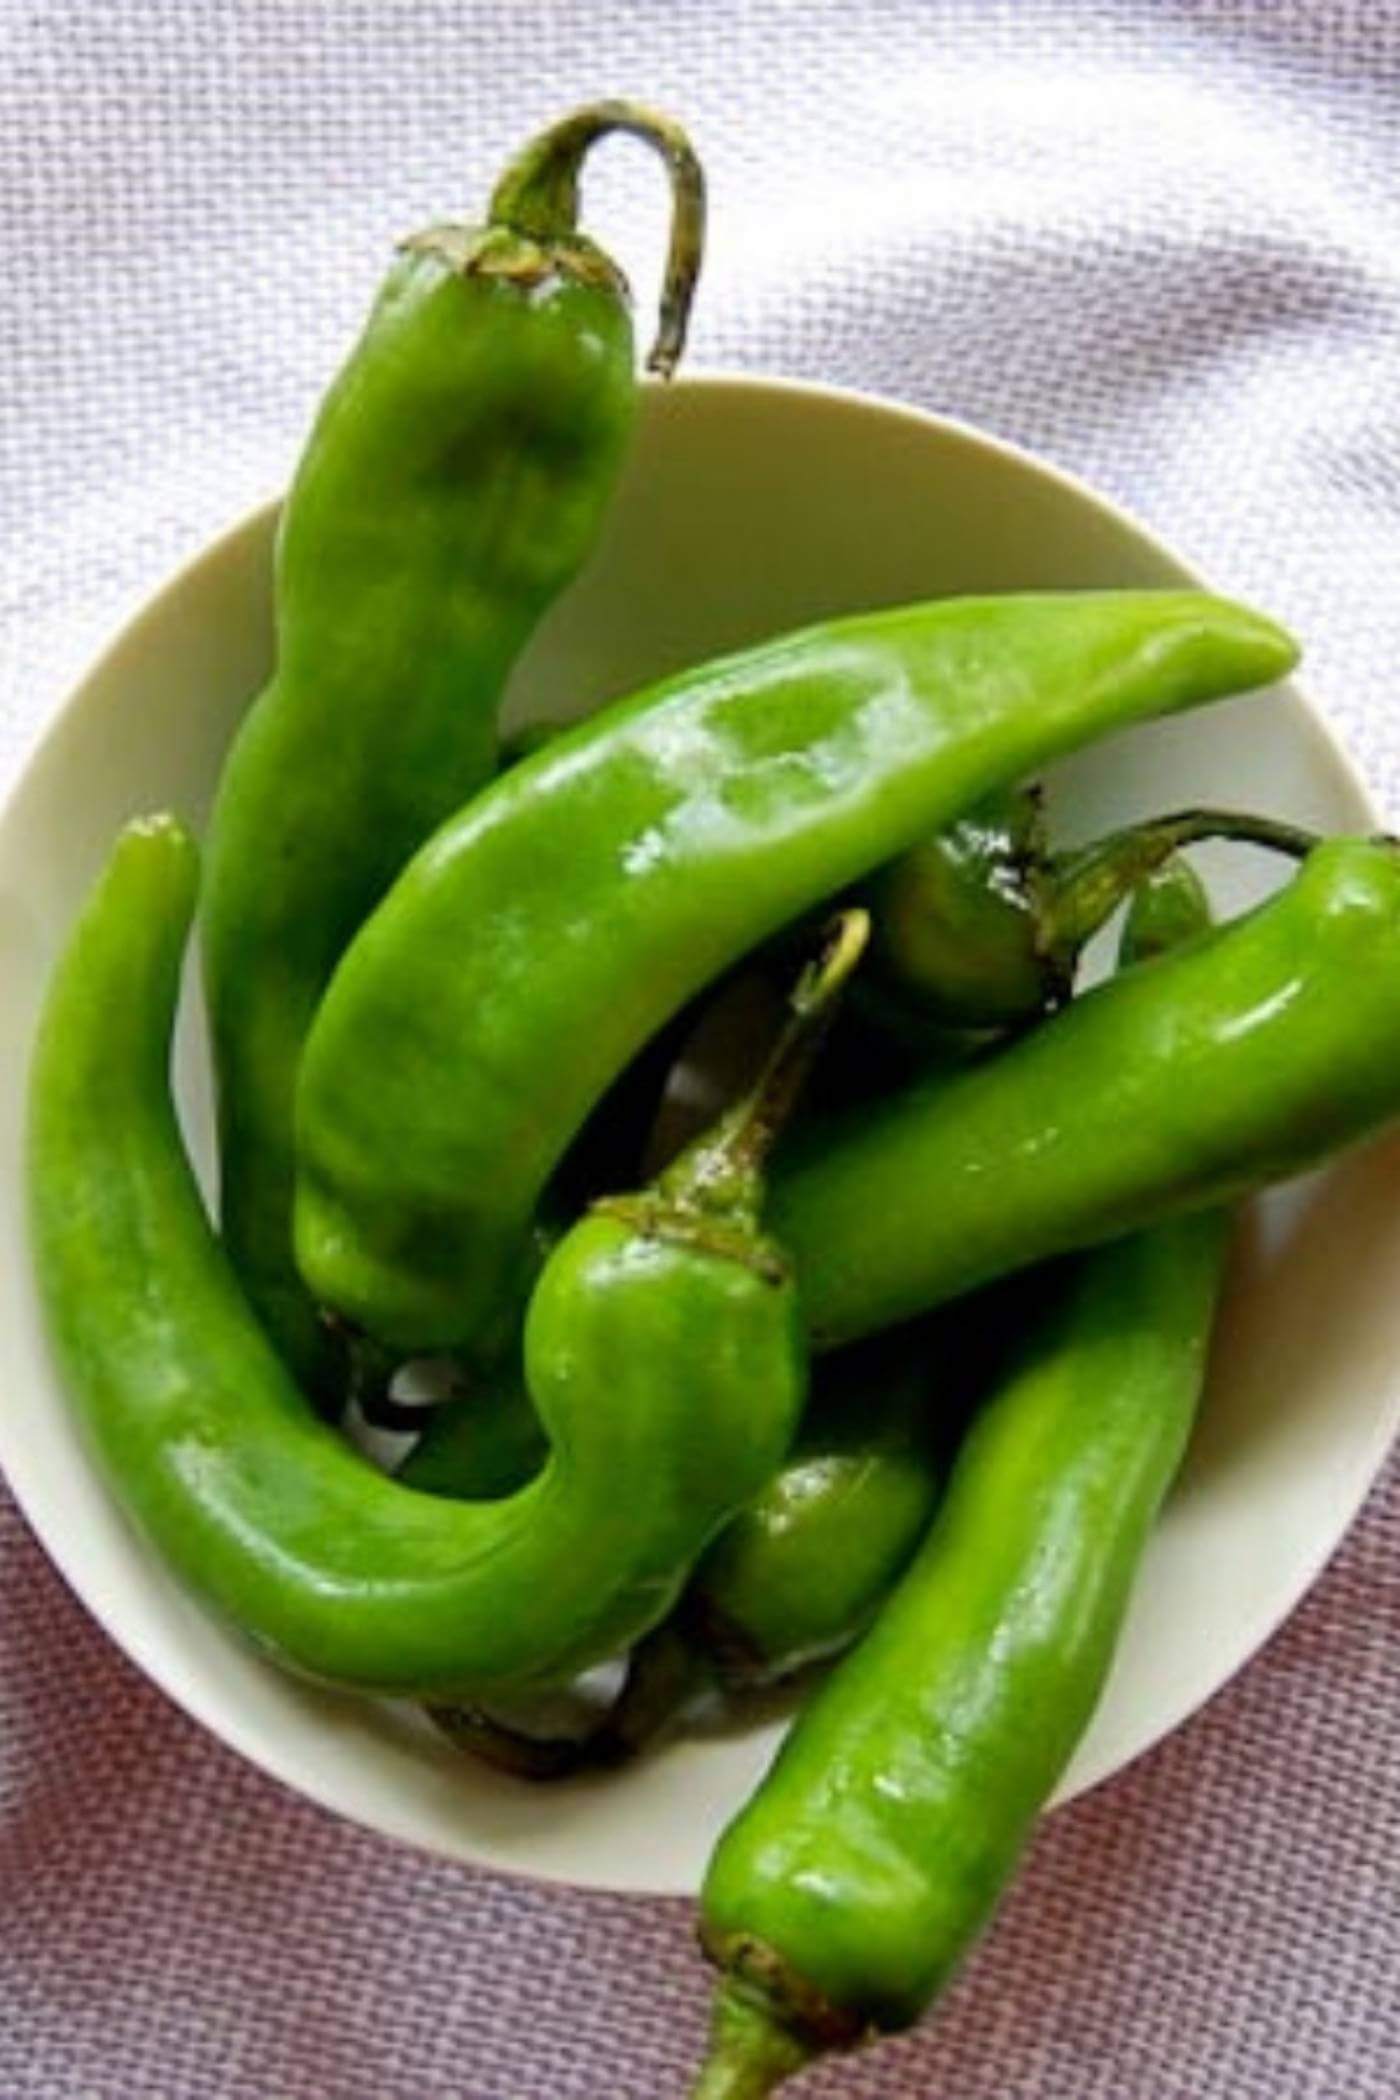 hatch chiles in bowl.